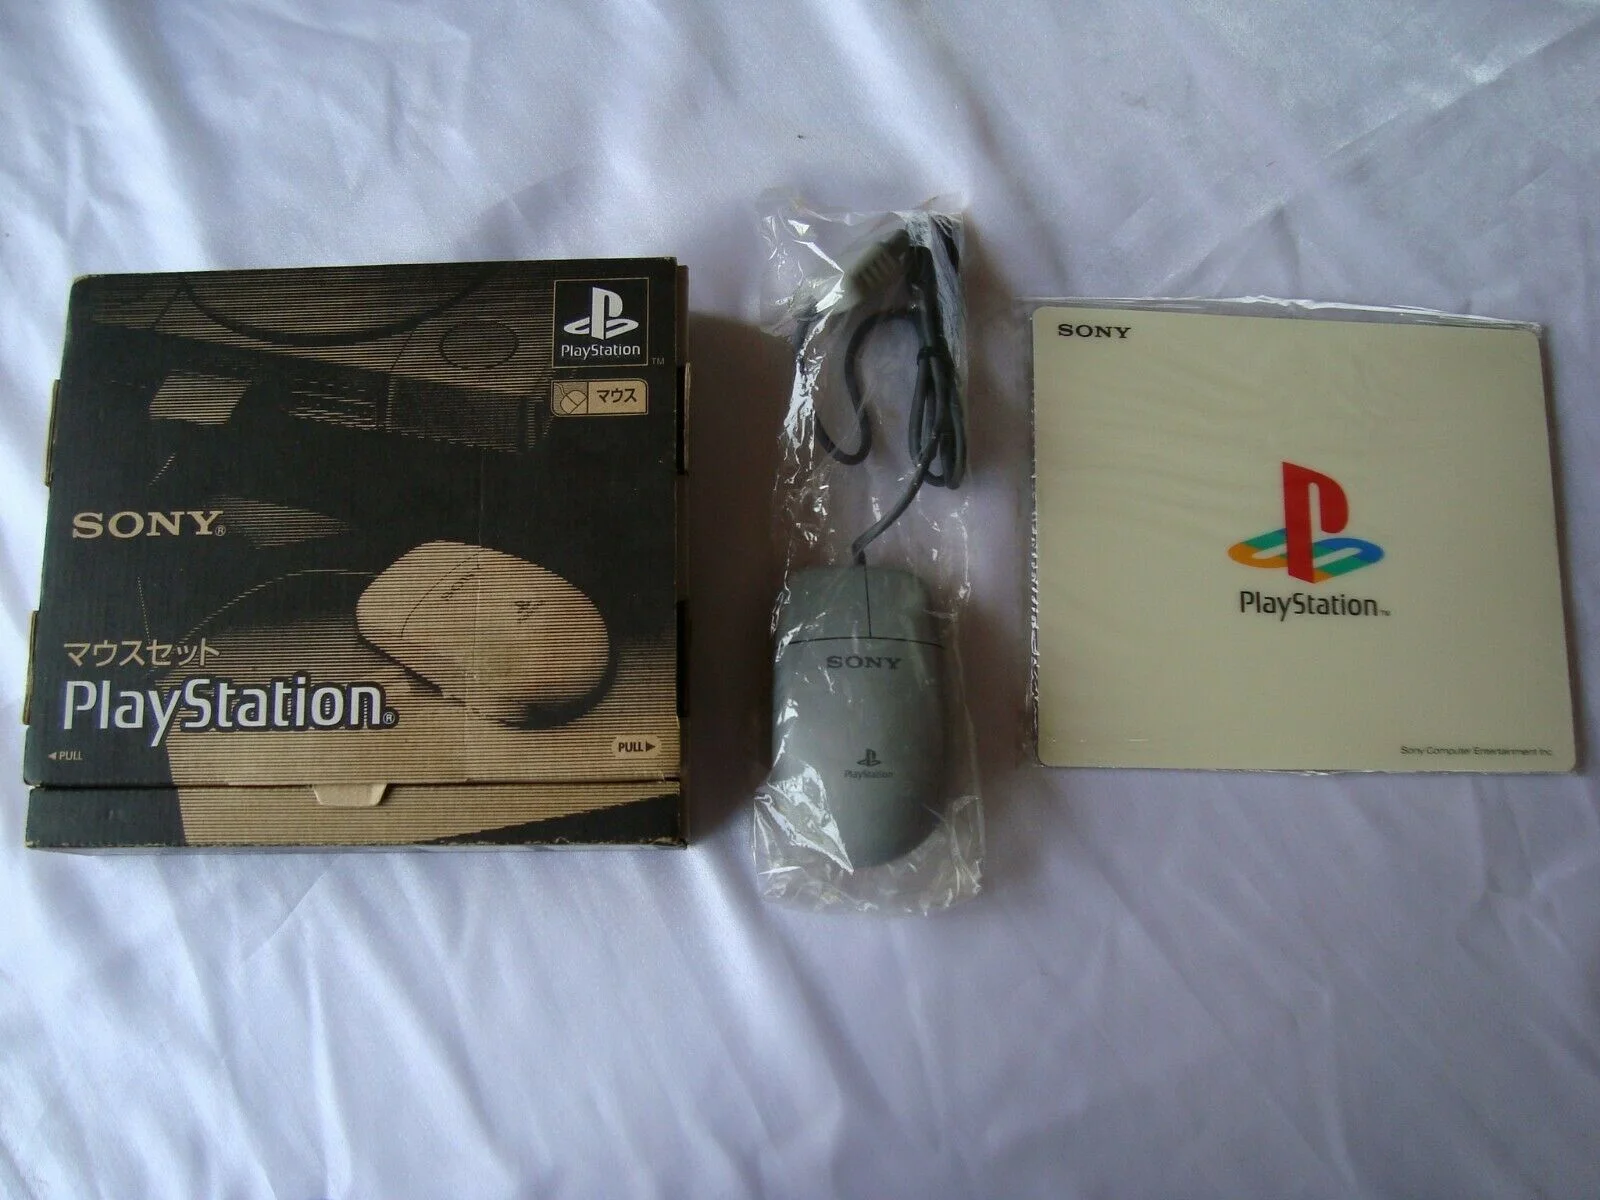  Sony Playstation Mouse [JP]